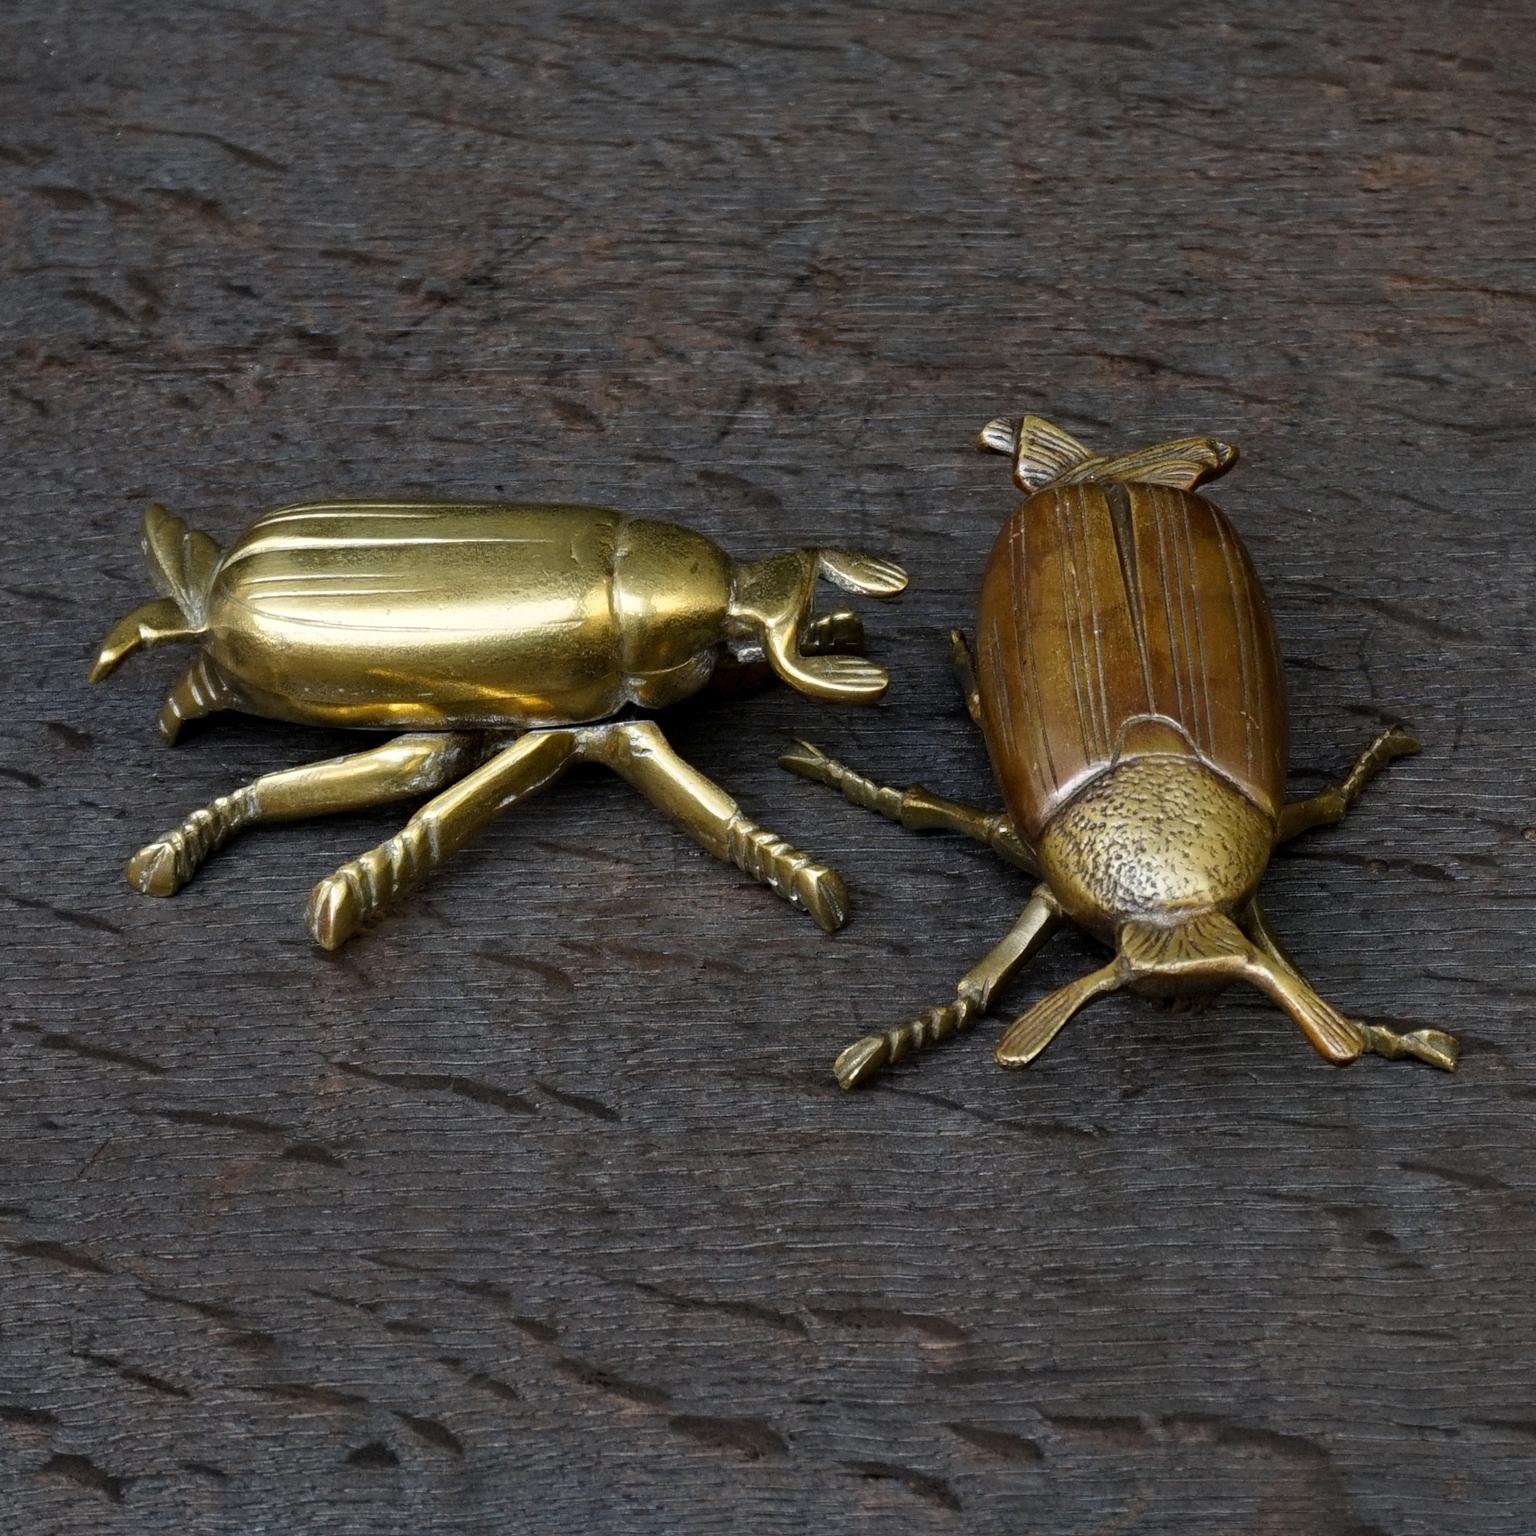 Cast Five 1960s English Brass Beetle or Bug Trinket Dishes, Ashtray, Vide-Poche